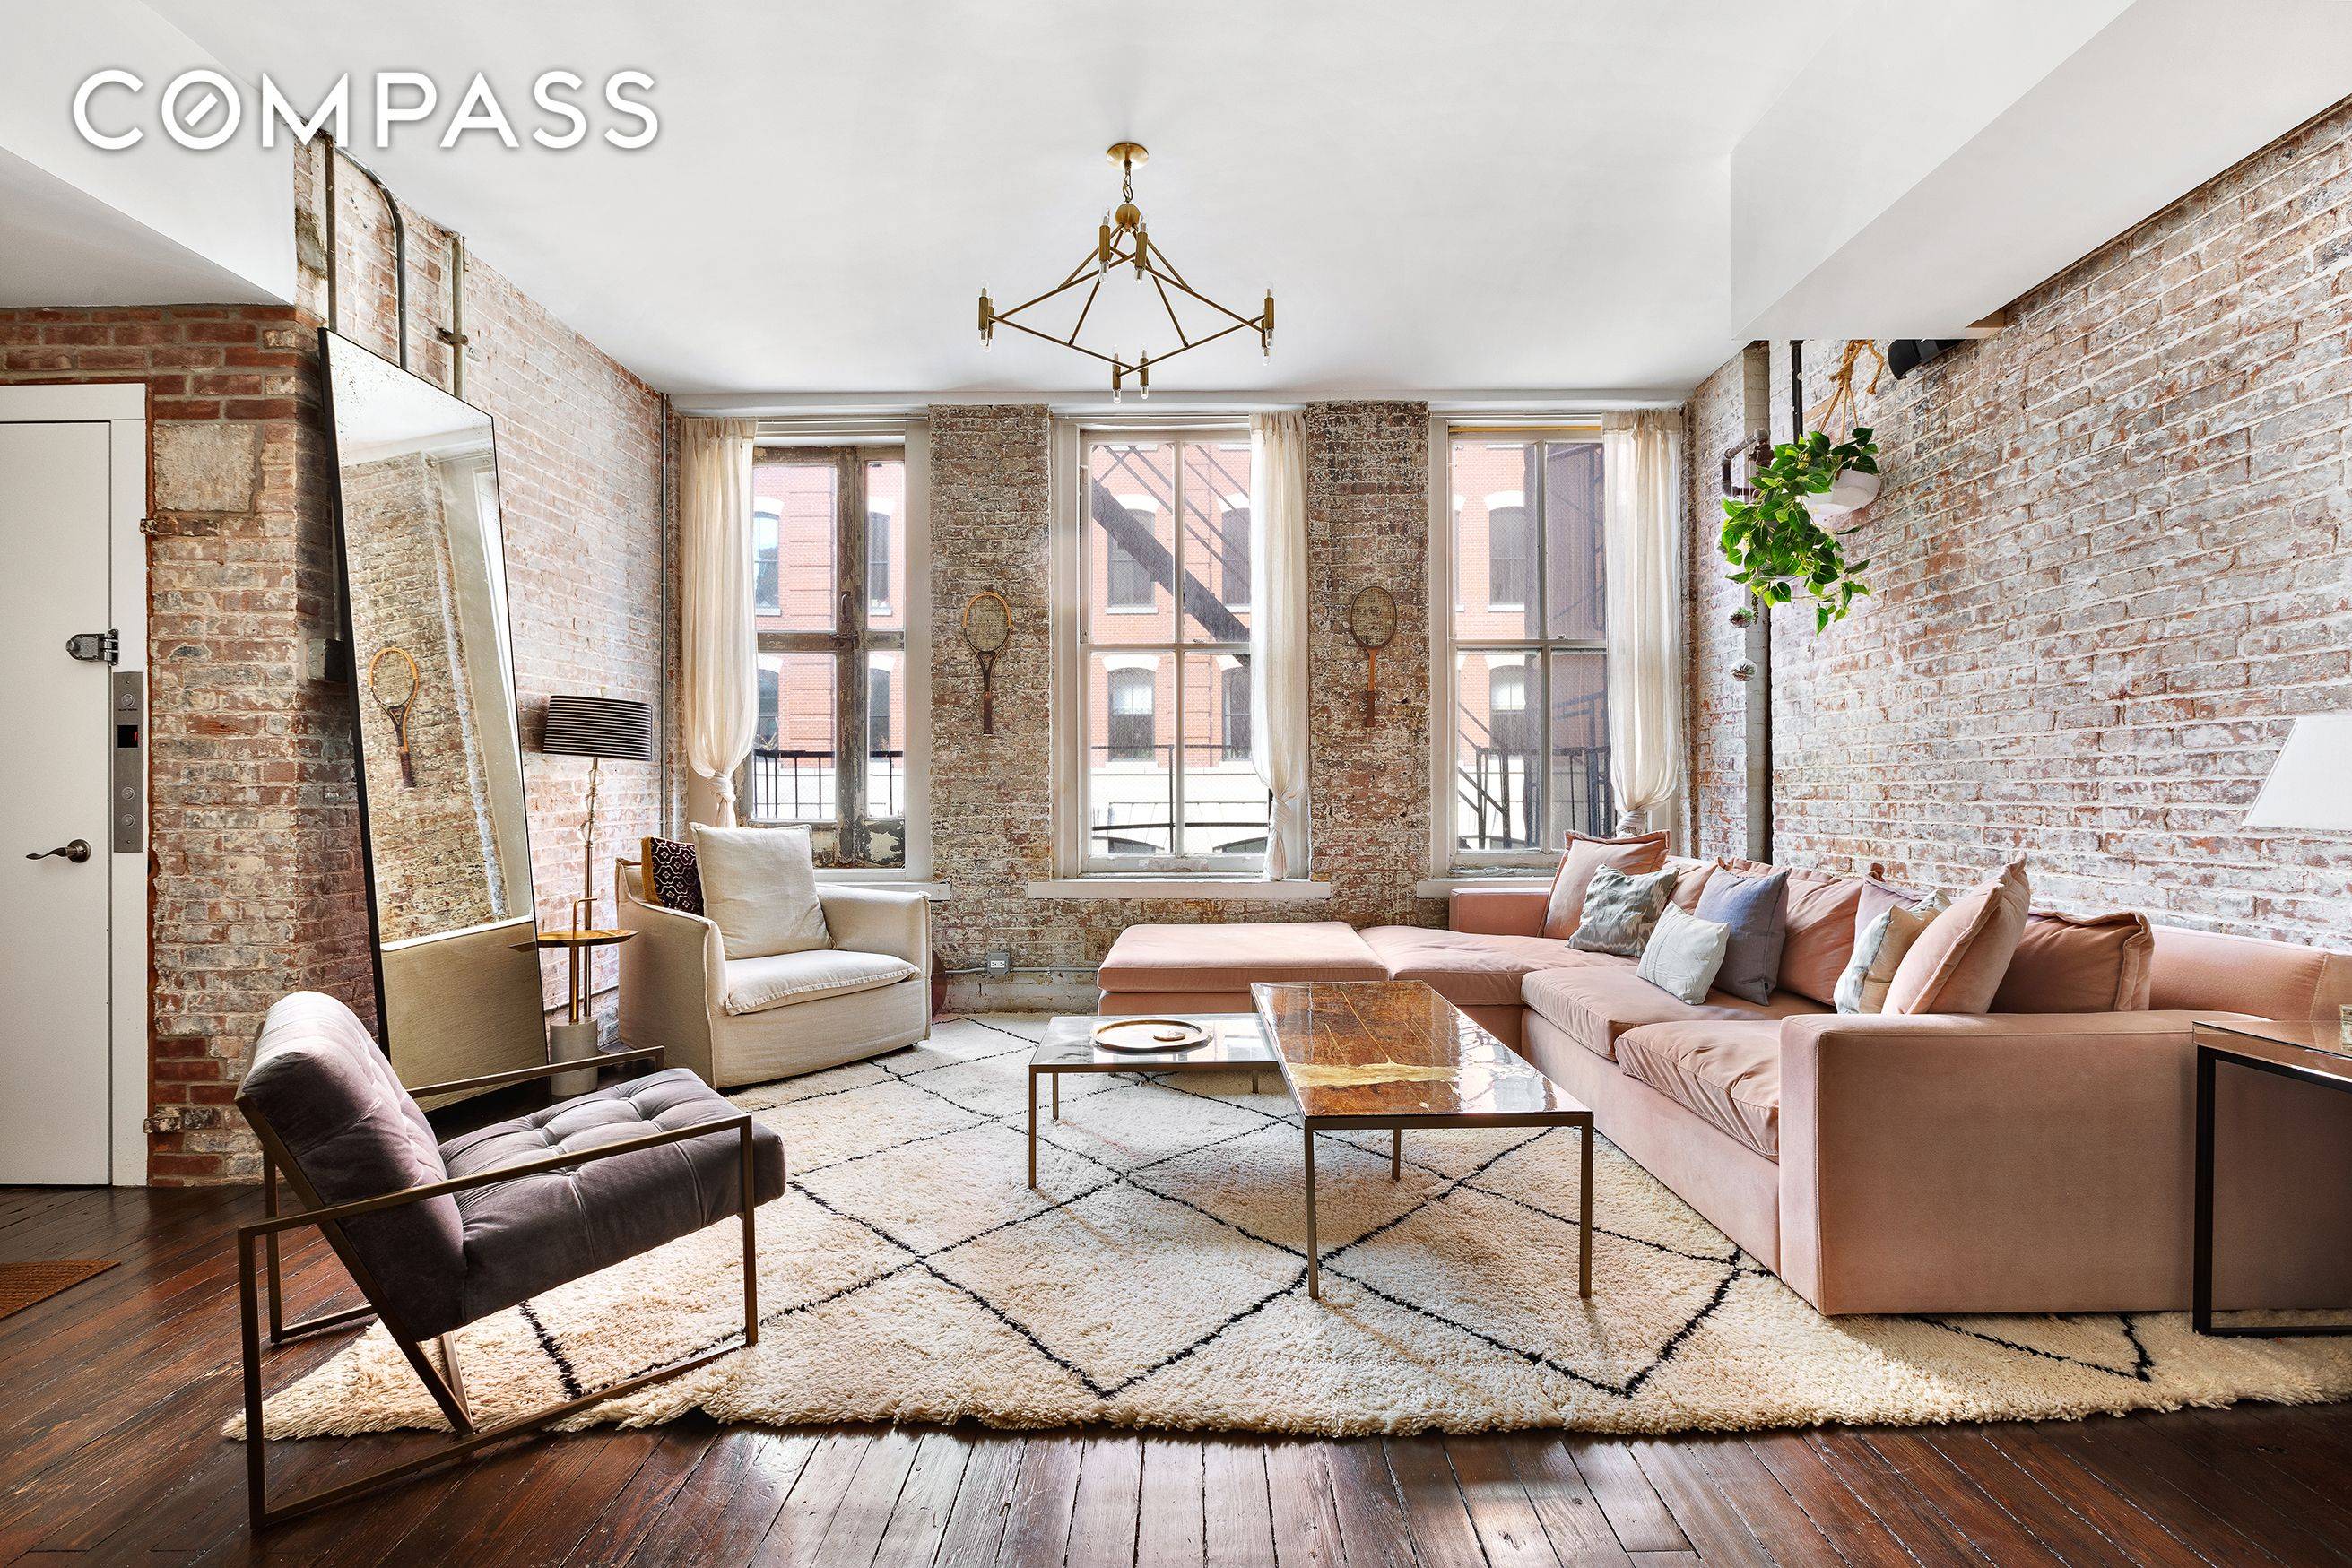 Spectacular original details meet chic designer style in this beautifully renovated two bedroom loft with large den and two bathrooms in a historic Tribeca boutique cooperative.